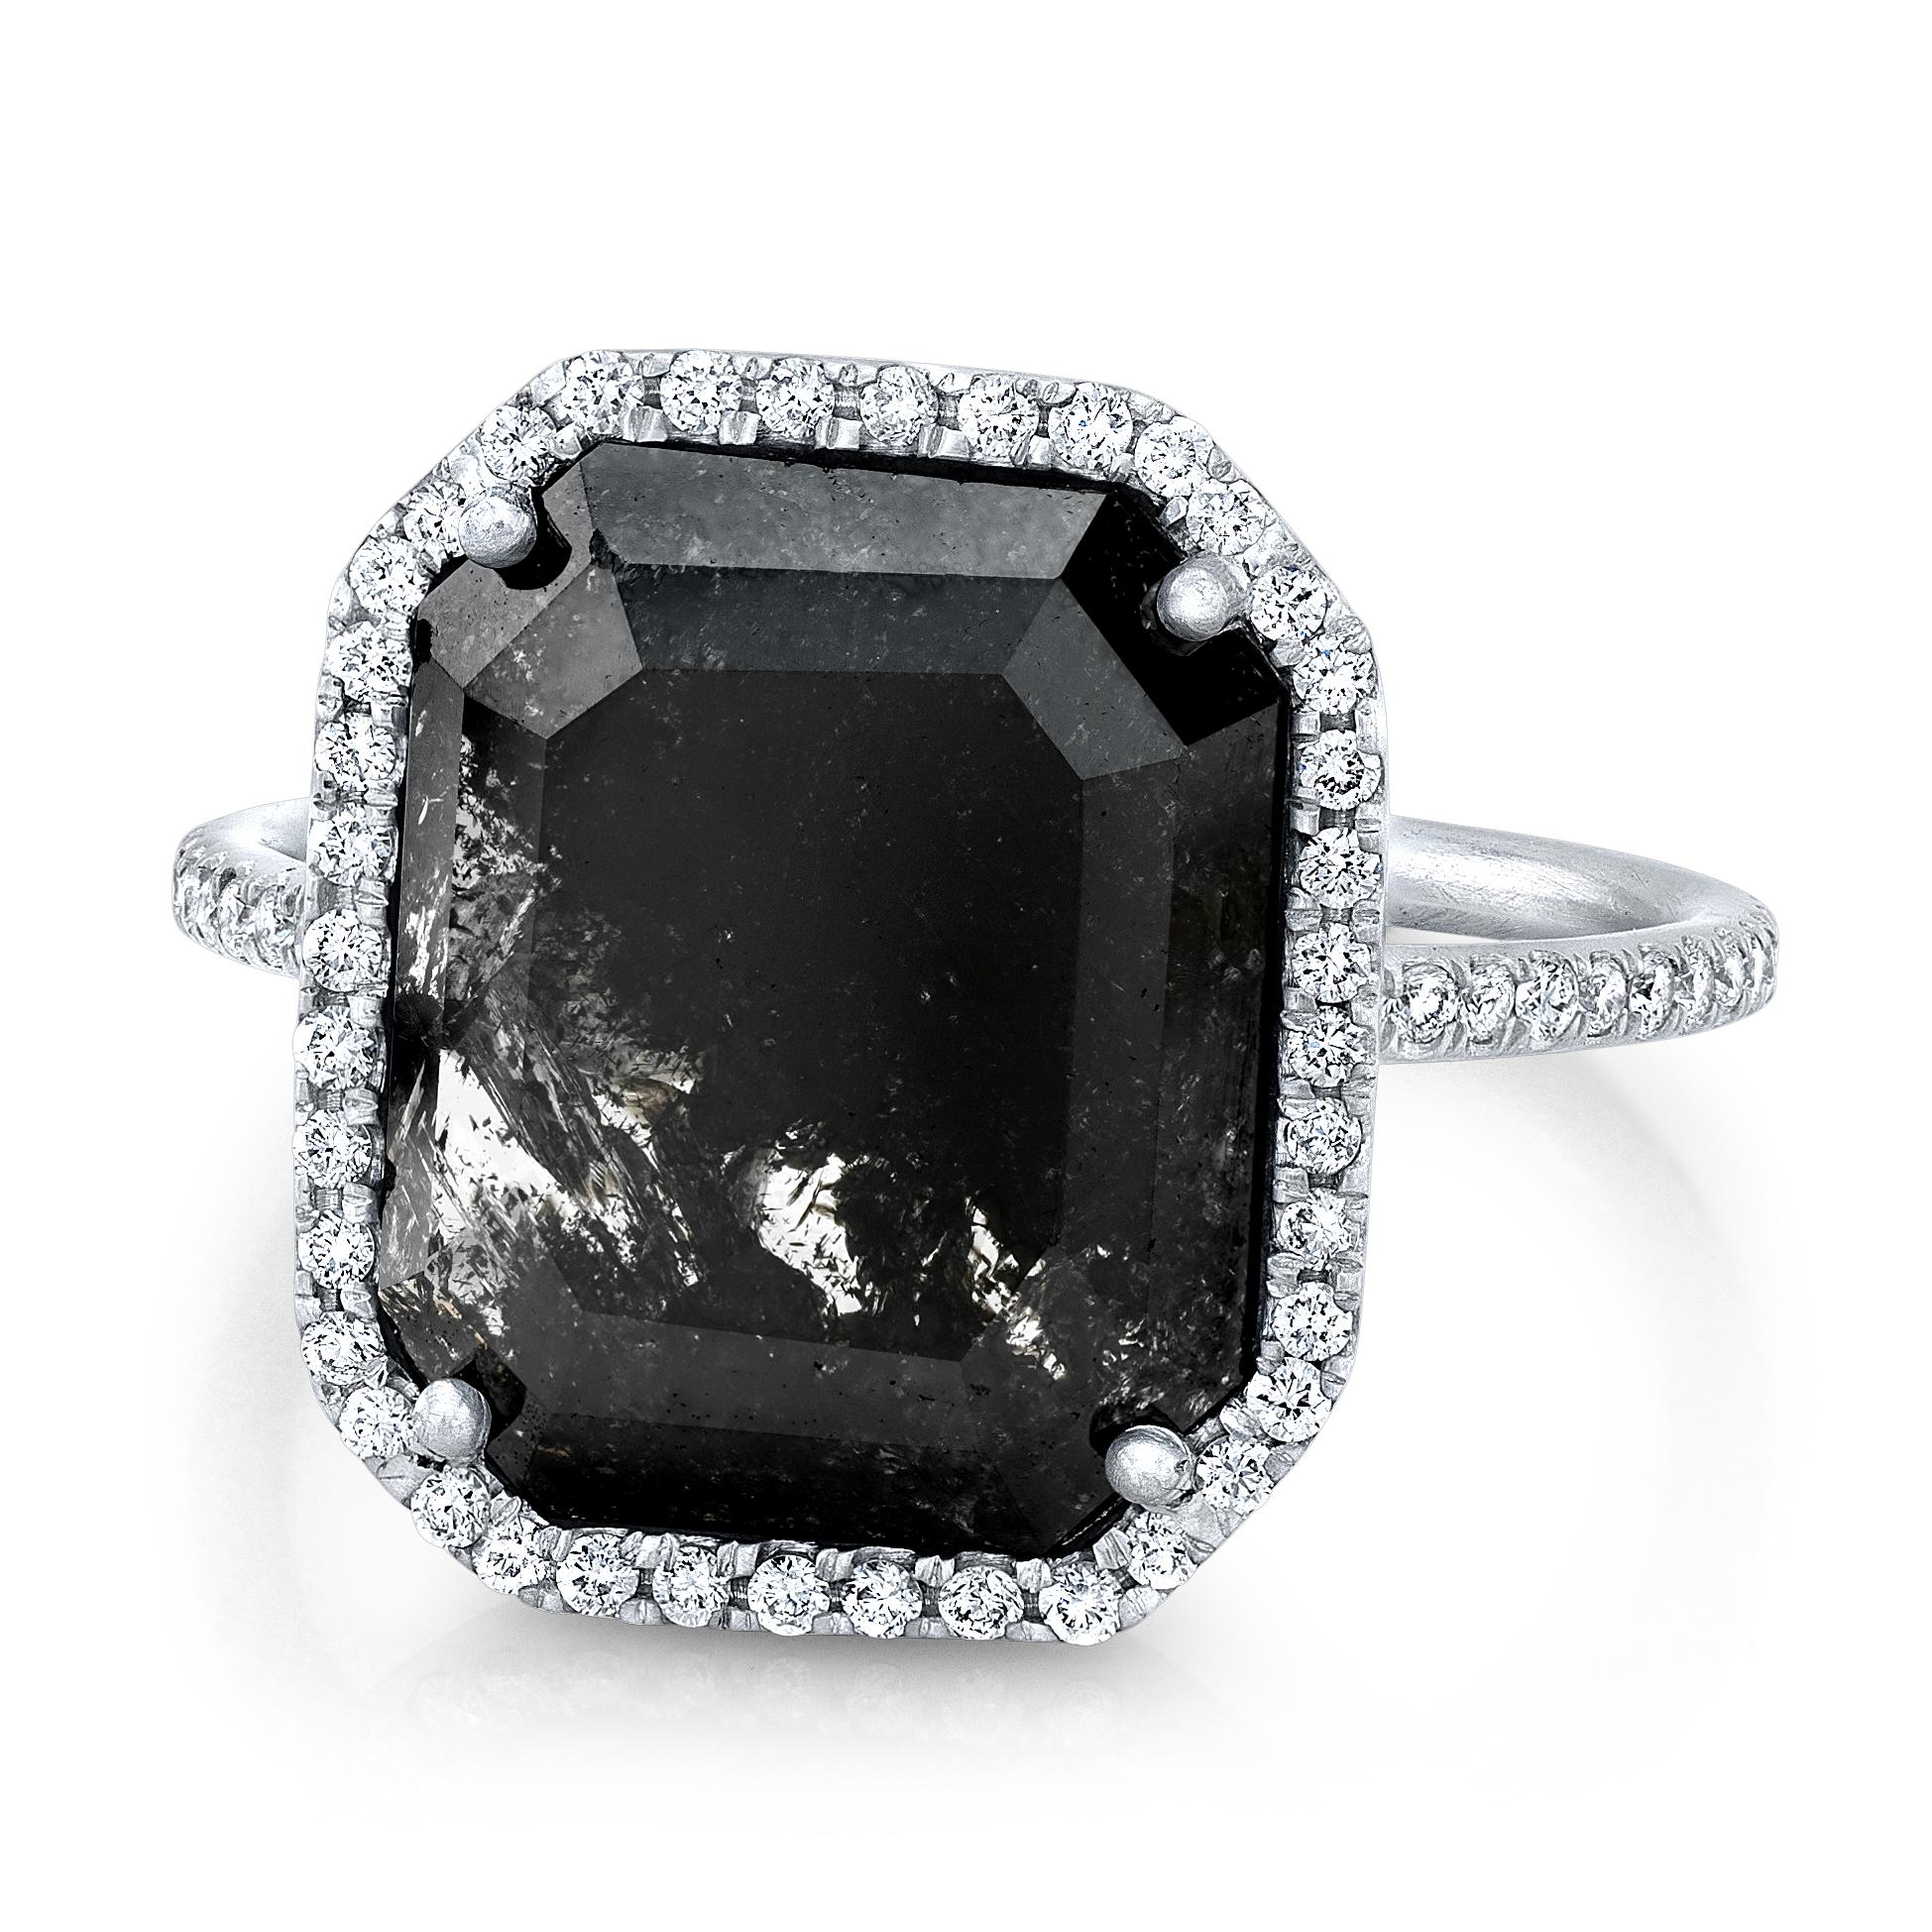 4.13ct Fancy Clear Black Portrait cut Rustic Diamond with .37ct Diamond Pave halo and Diamond Pave Band set in 18k Matte Finish White Gold. Size 6 1/2. Diamonds go 2/3 around the band. Hand made and hand set in Los Angeles. All Diamonds are